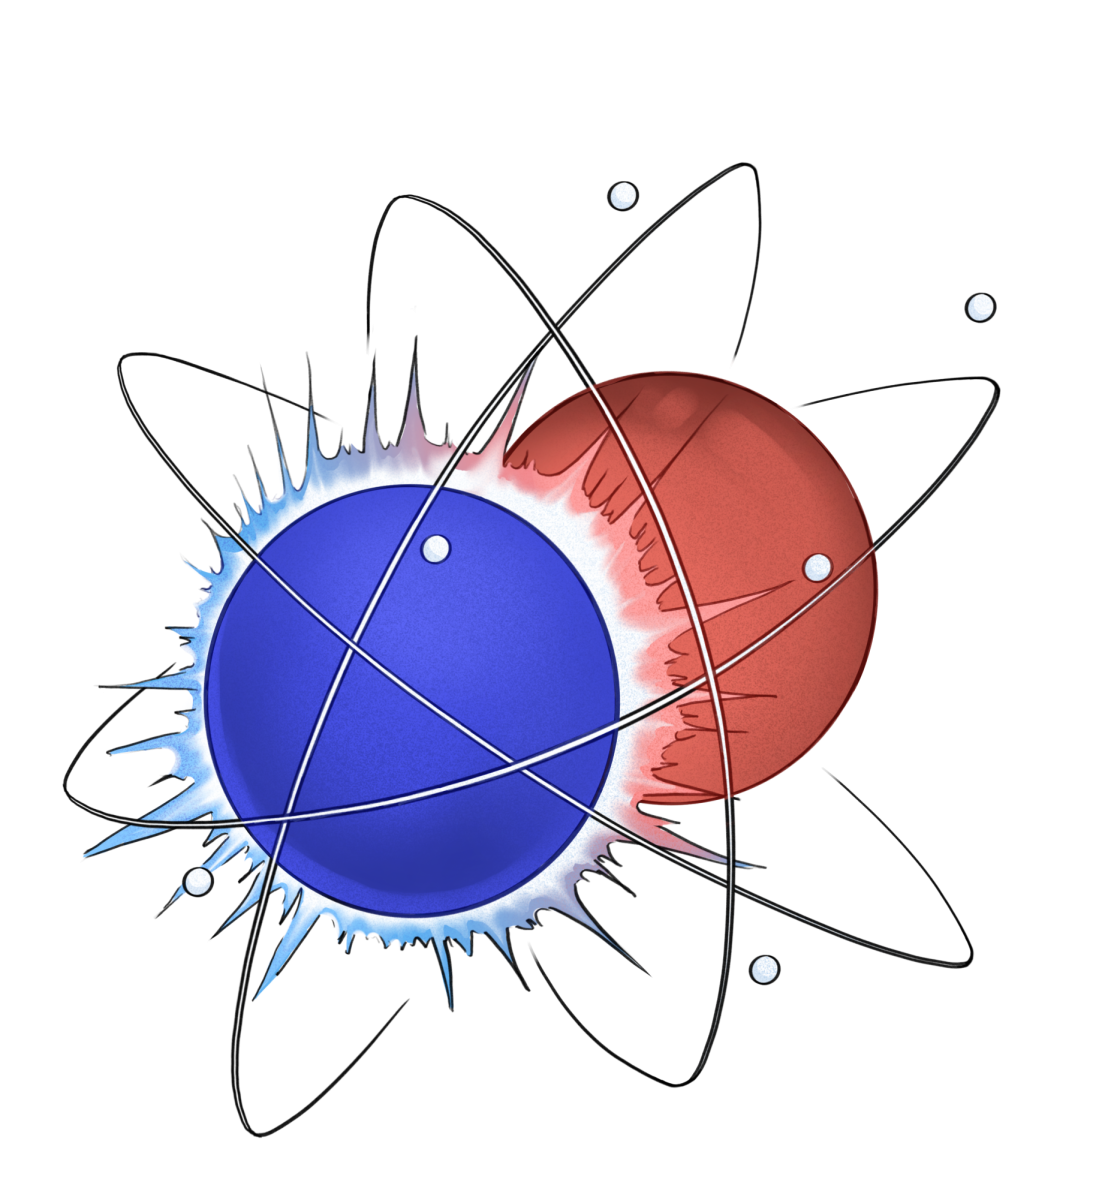 Illustration depicting the collision of two atoms.